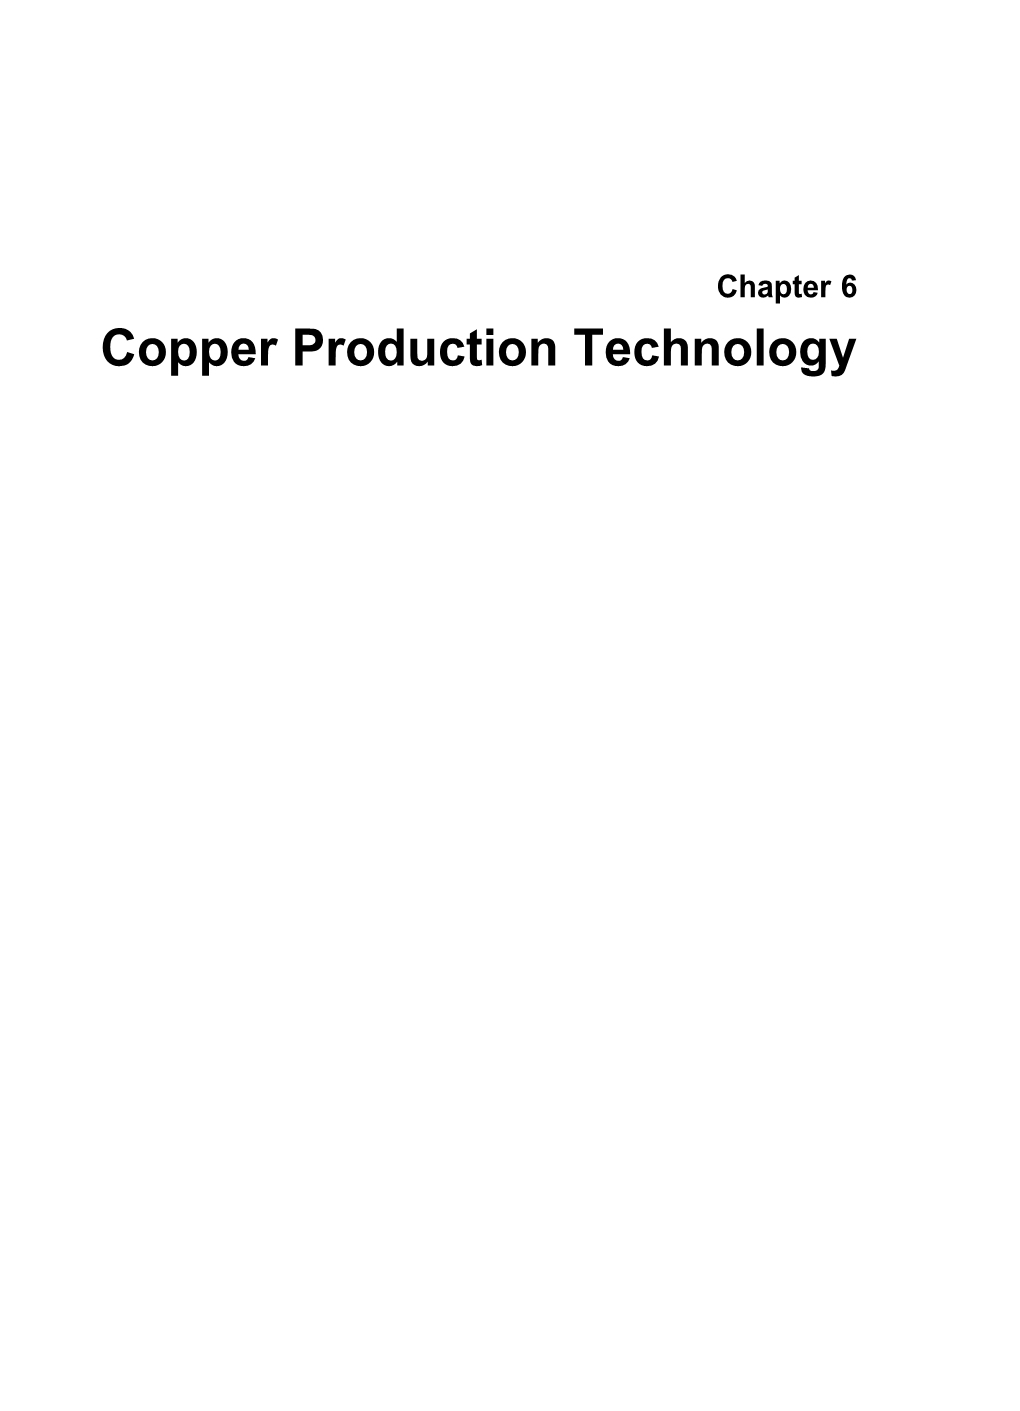 Copper Production Technology CONTENTS Page Figure Page History